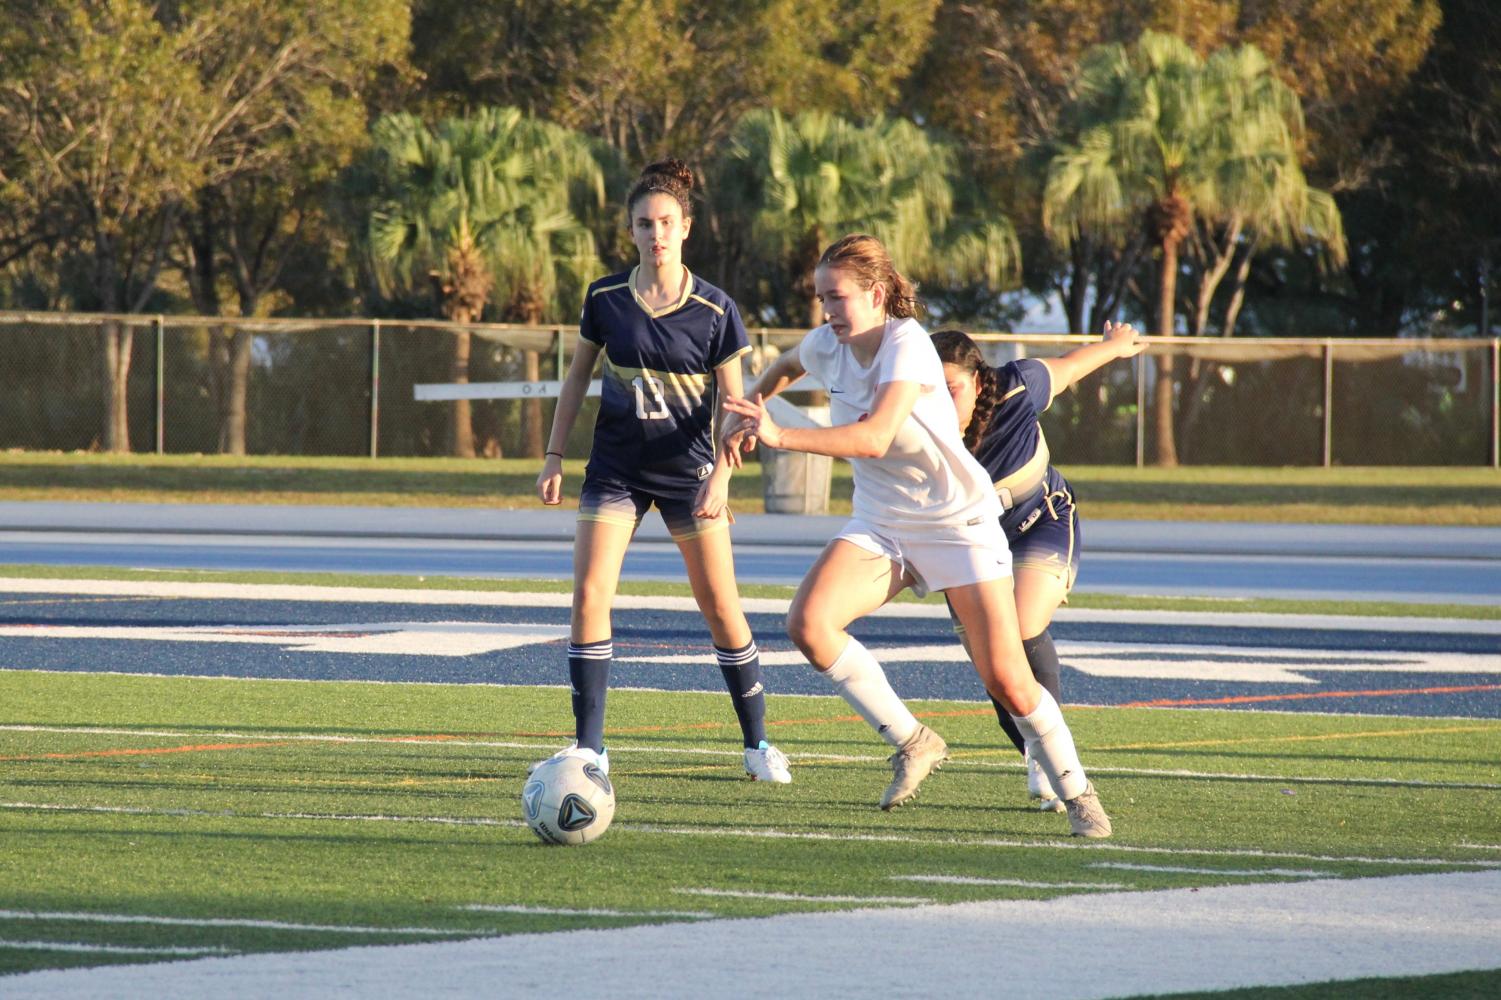 Girls+Soccer+District+Championship%3A+Gables+Cavaliers+VS+Miami+High+Stingarees